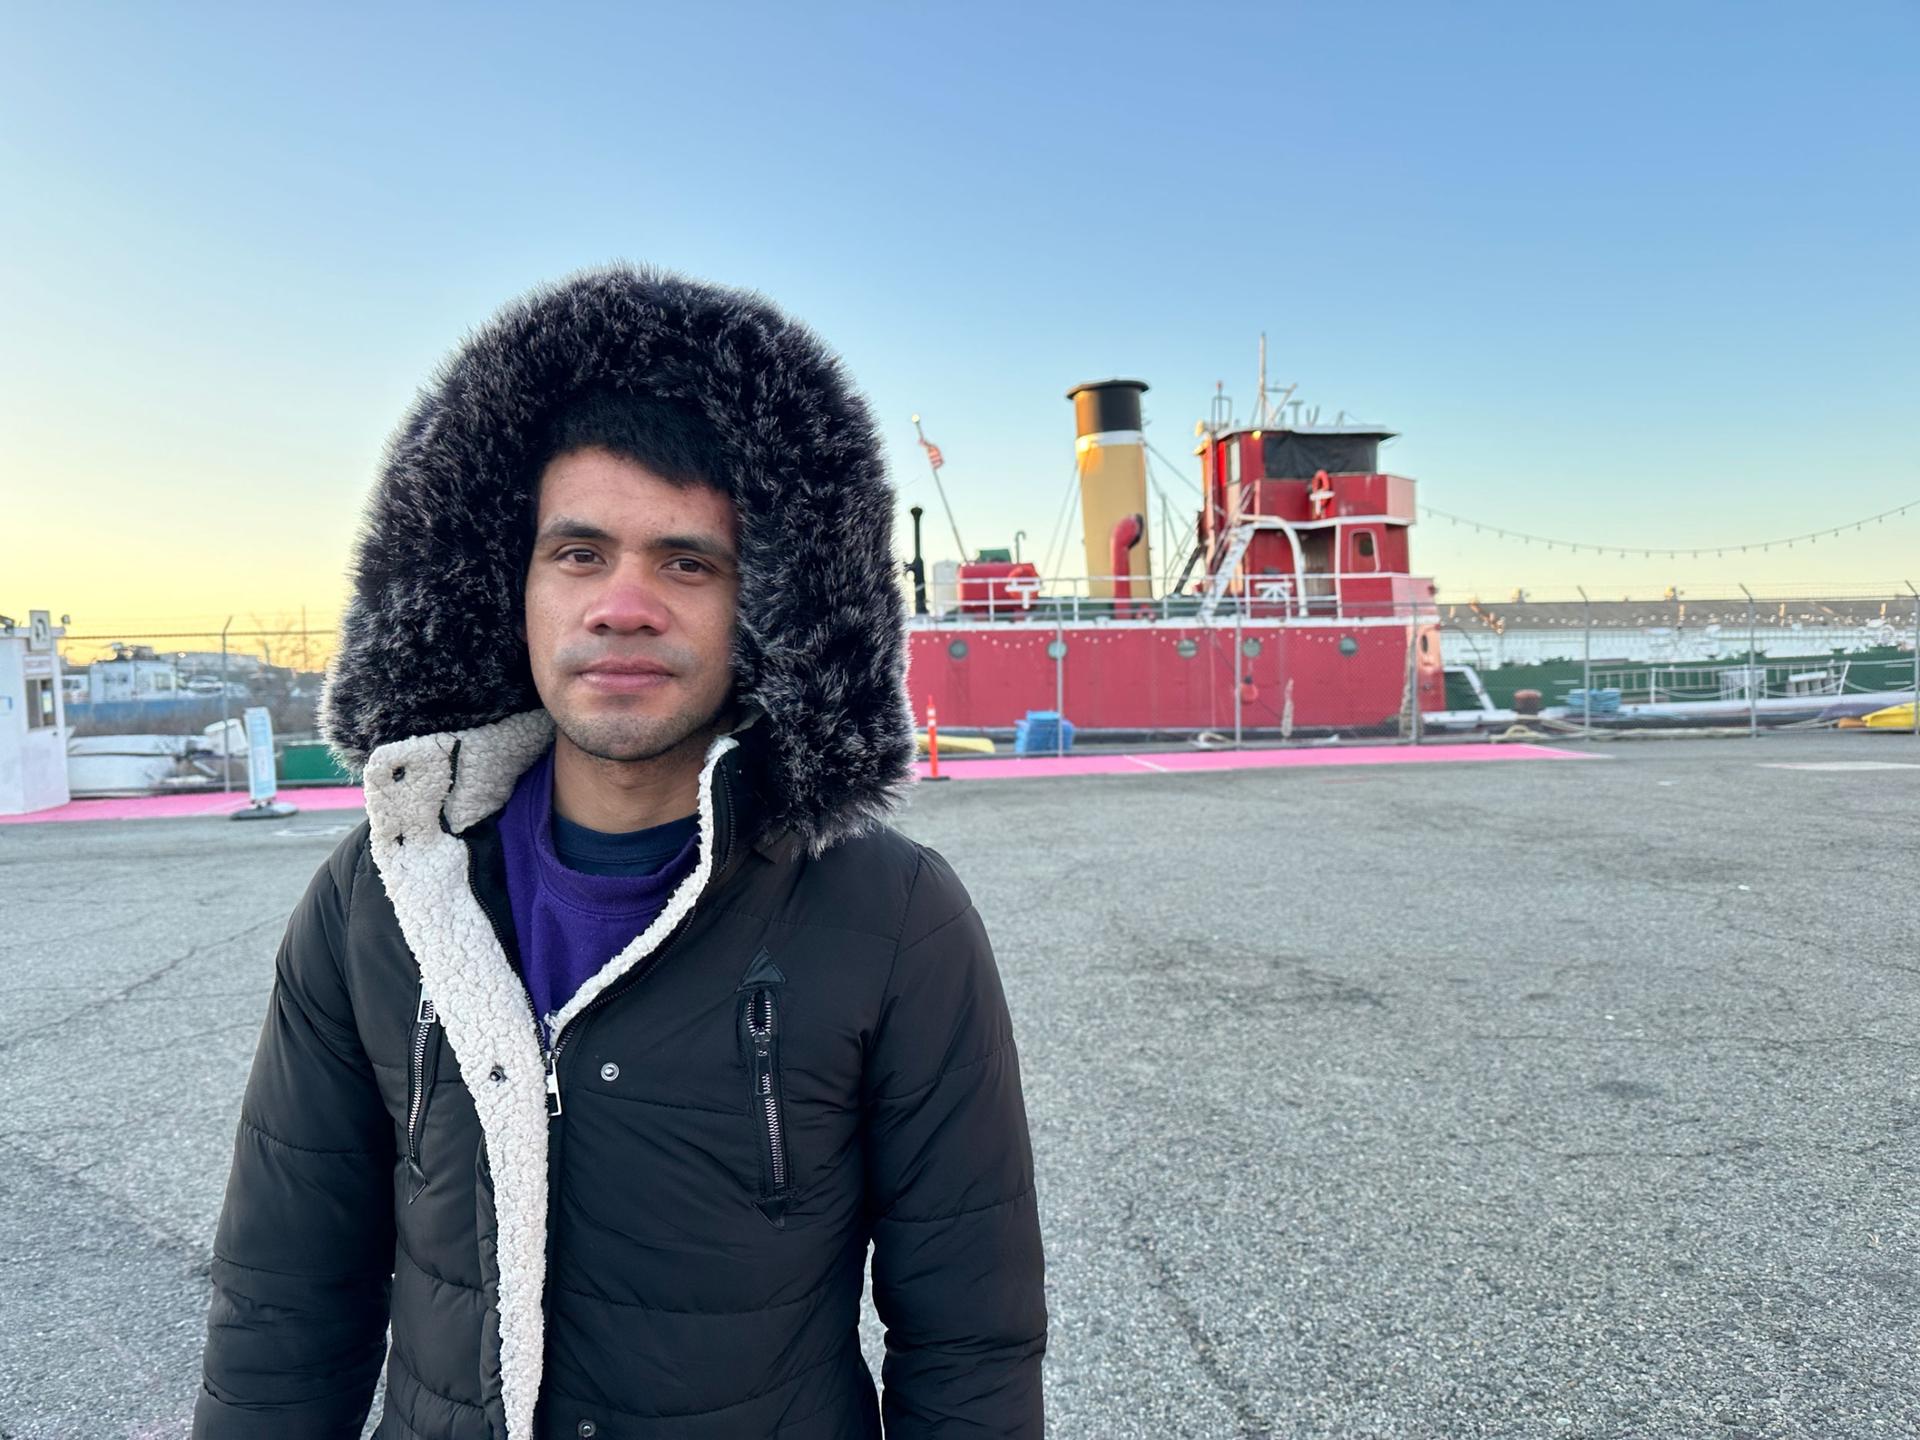 José Perez, 26, arrived in New York City last fall, but he left Venezuela four years ago. He first moved to Brazil, then Chile, Peru, Ecuador and came to the US looking for better opportunities.